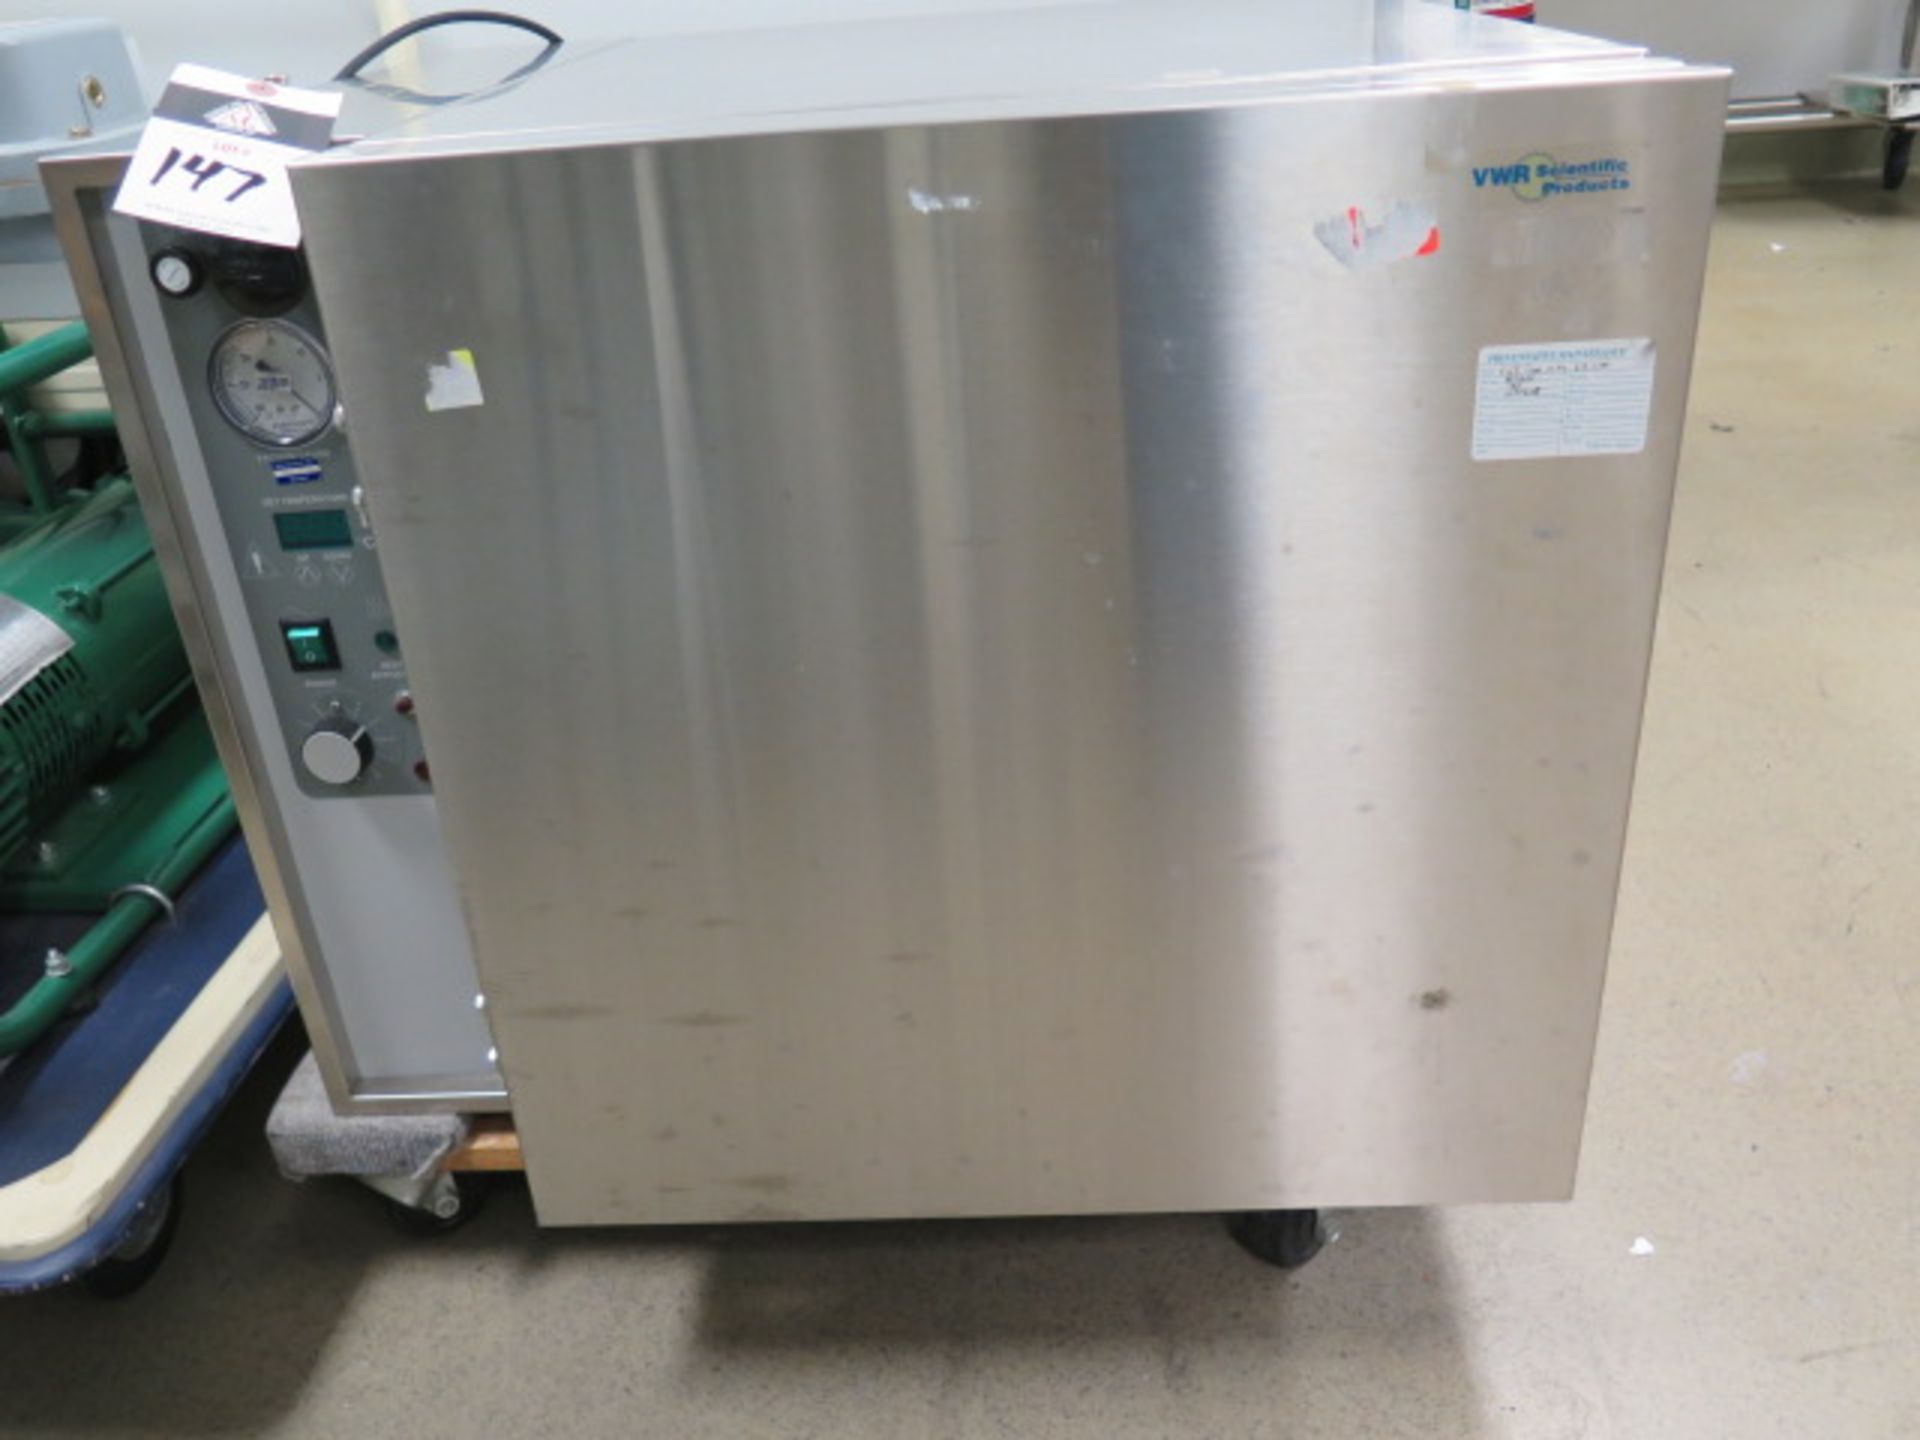 VWR mdl. 1450MS Stainless Steel Vacuum Oven s/n 0600401 Heats to 225 Degrees C (SOLD AS-IS - NO WARR